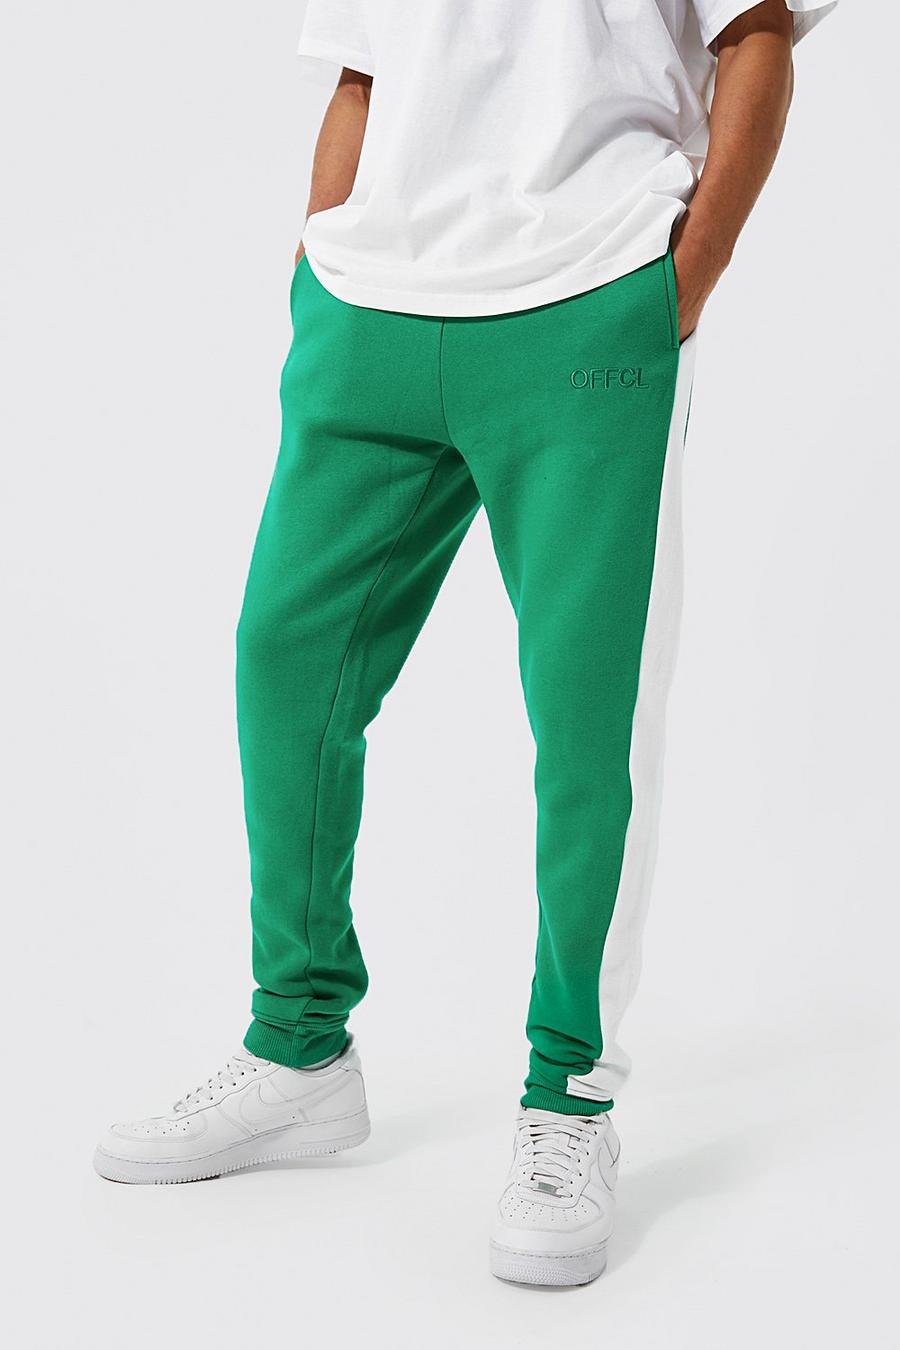 Bright green verde Tall Offcl Skinny Side Panel Jogger